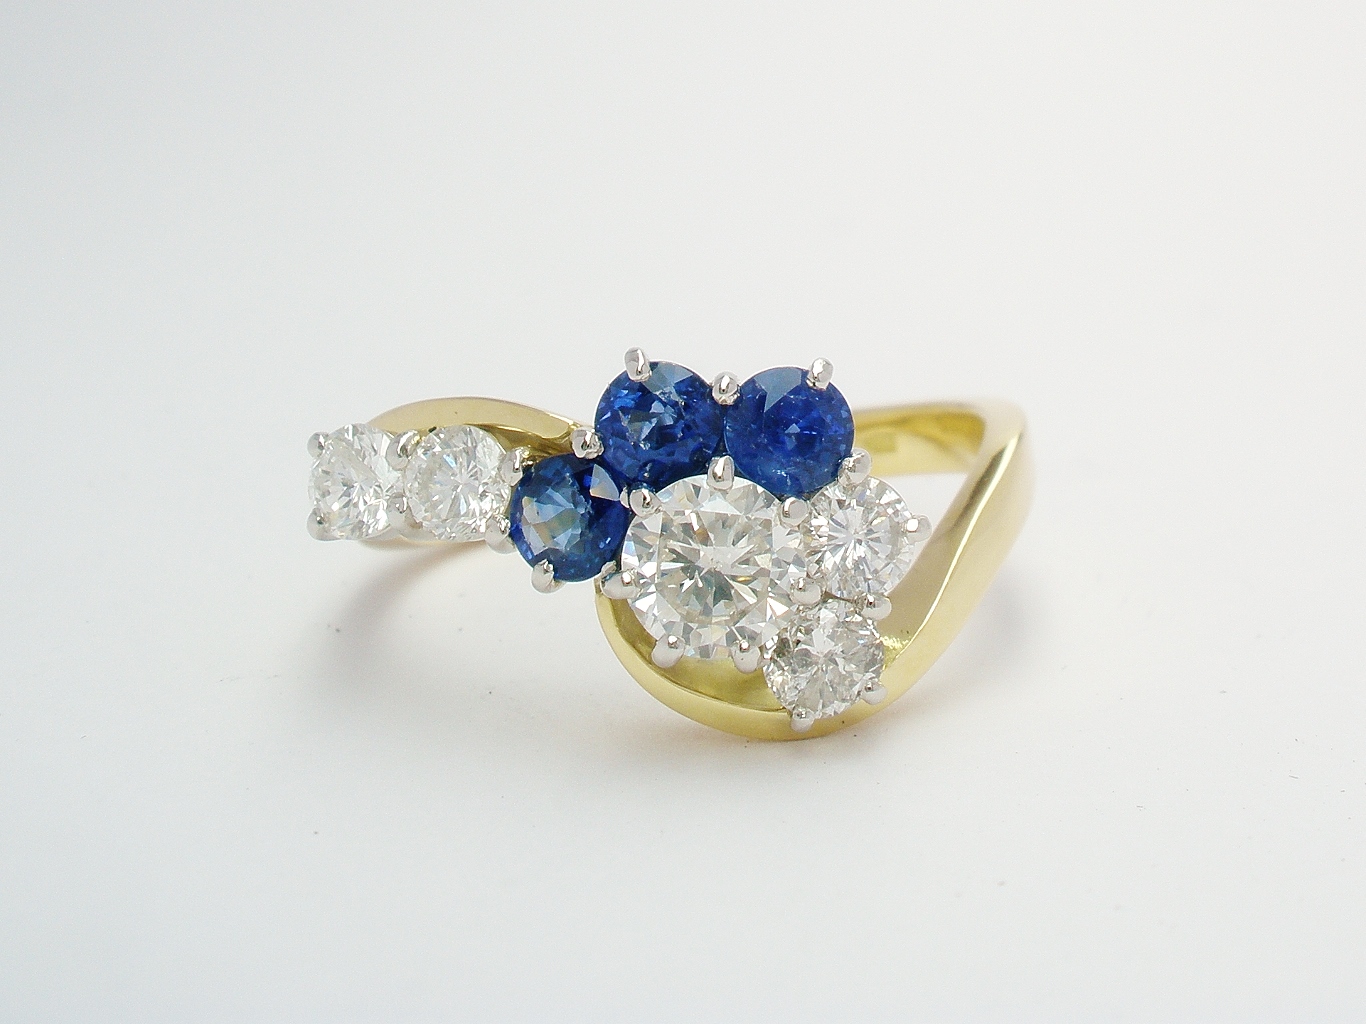 An 8 stone round brilliant cut and sapphire cross-over style ring mounted in 18ct yellow gold and platinum.